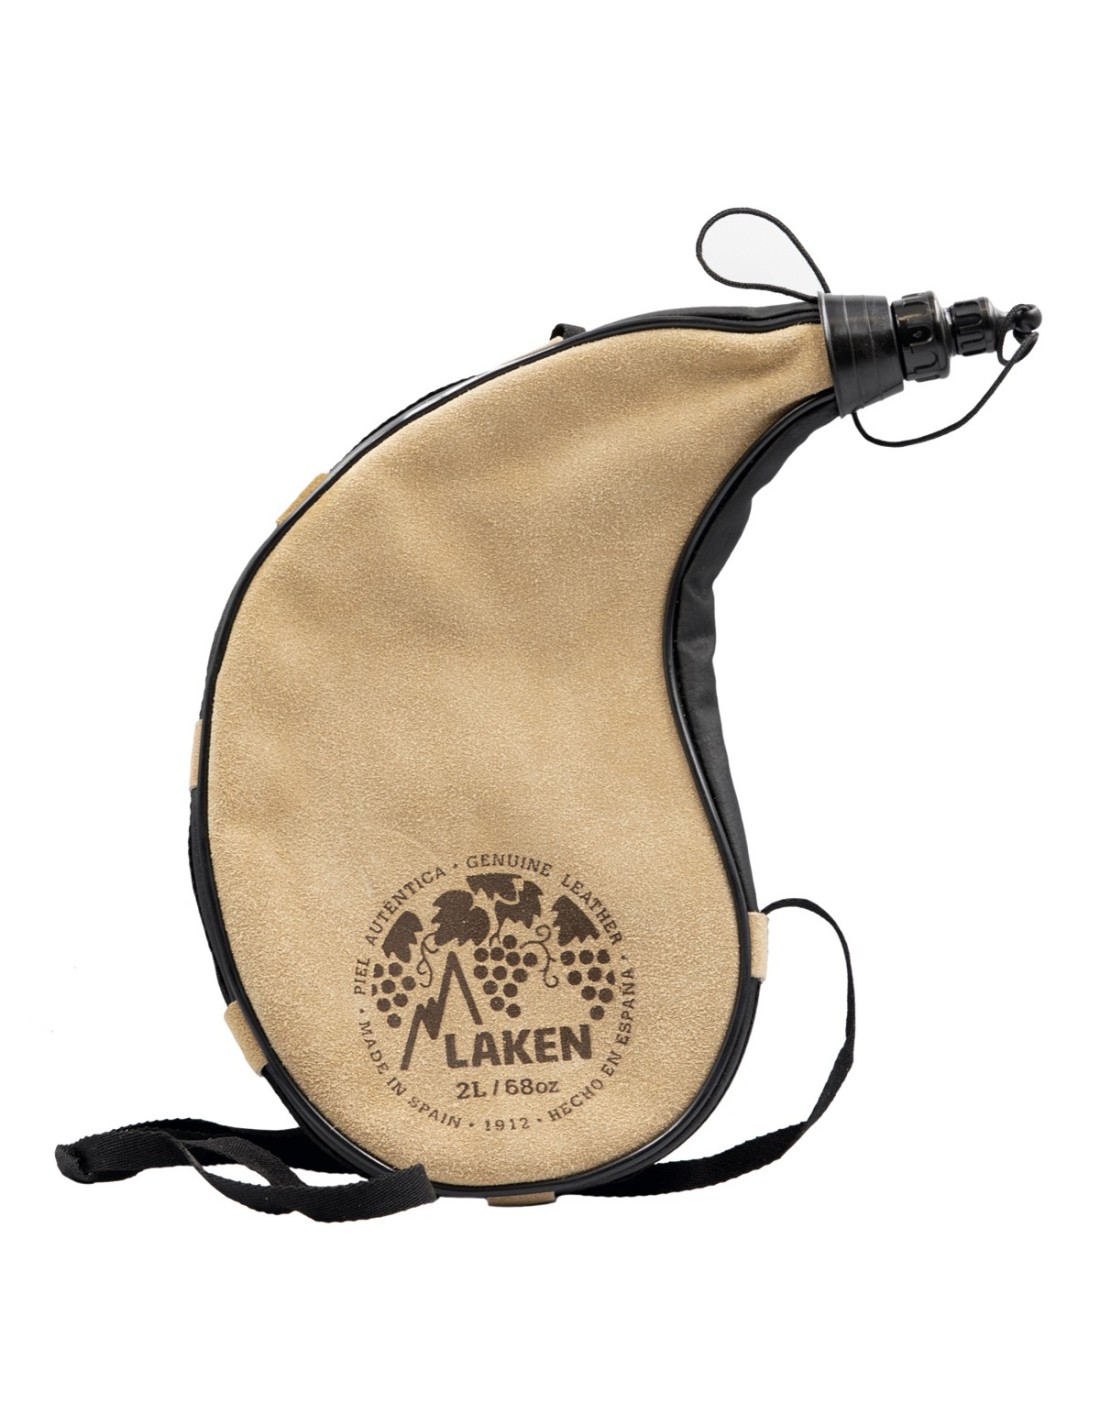 LEATHER CANTEEN CURVED FORM 2L